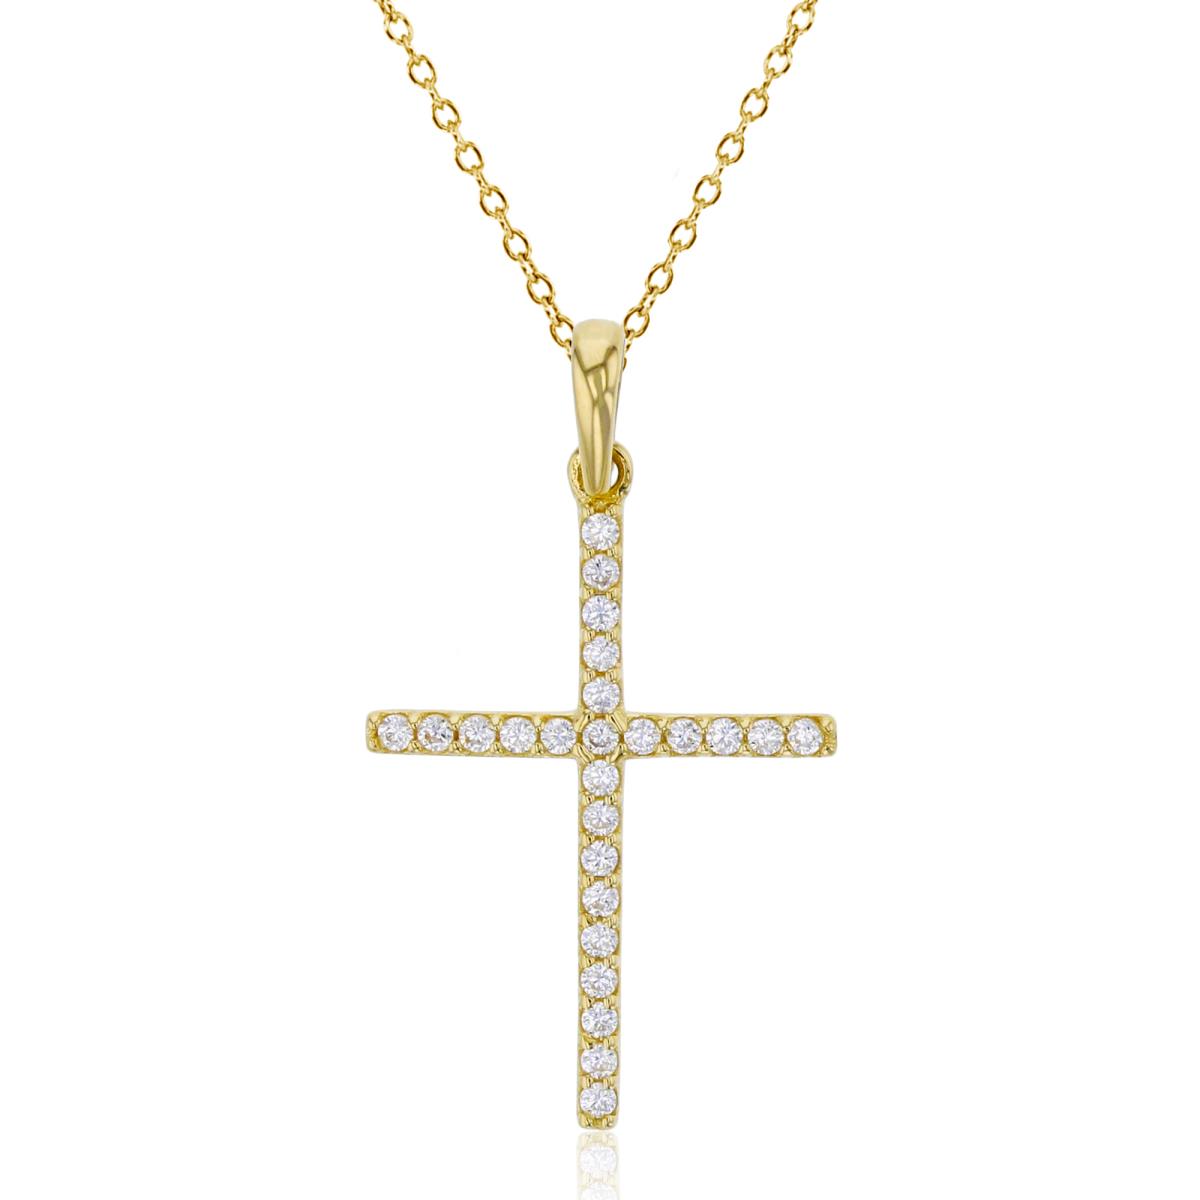 10K Yellow Gold 28x16mm Micropave Cross with Yellow Plated Silver Chain 18" Necklace